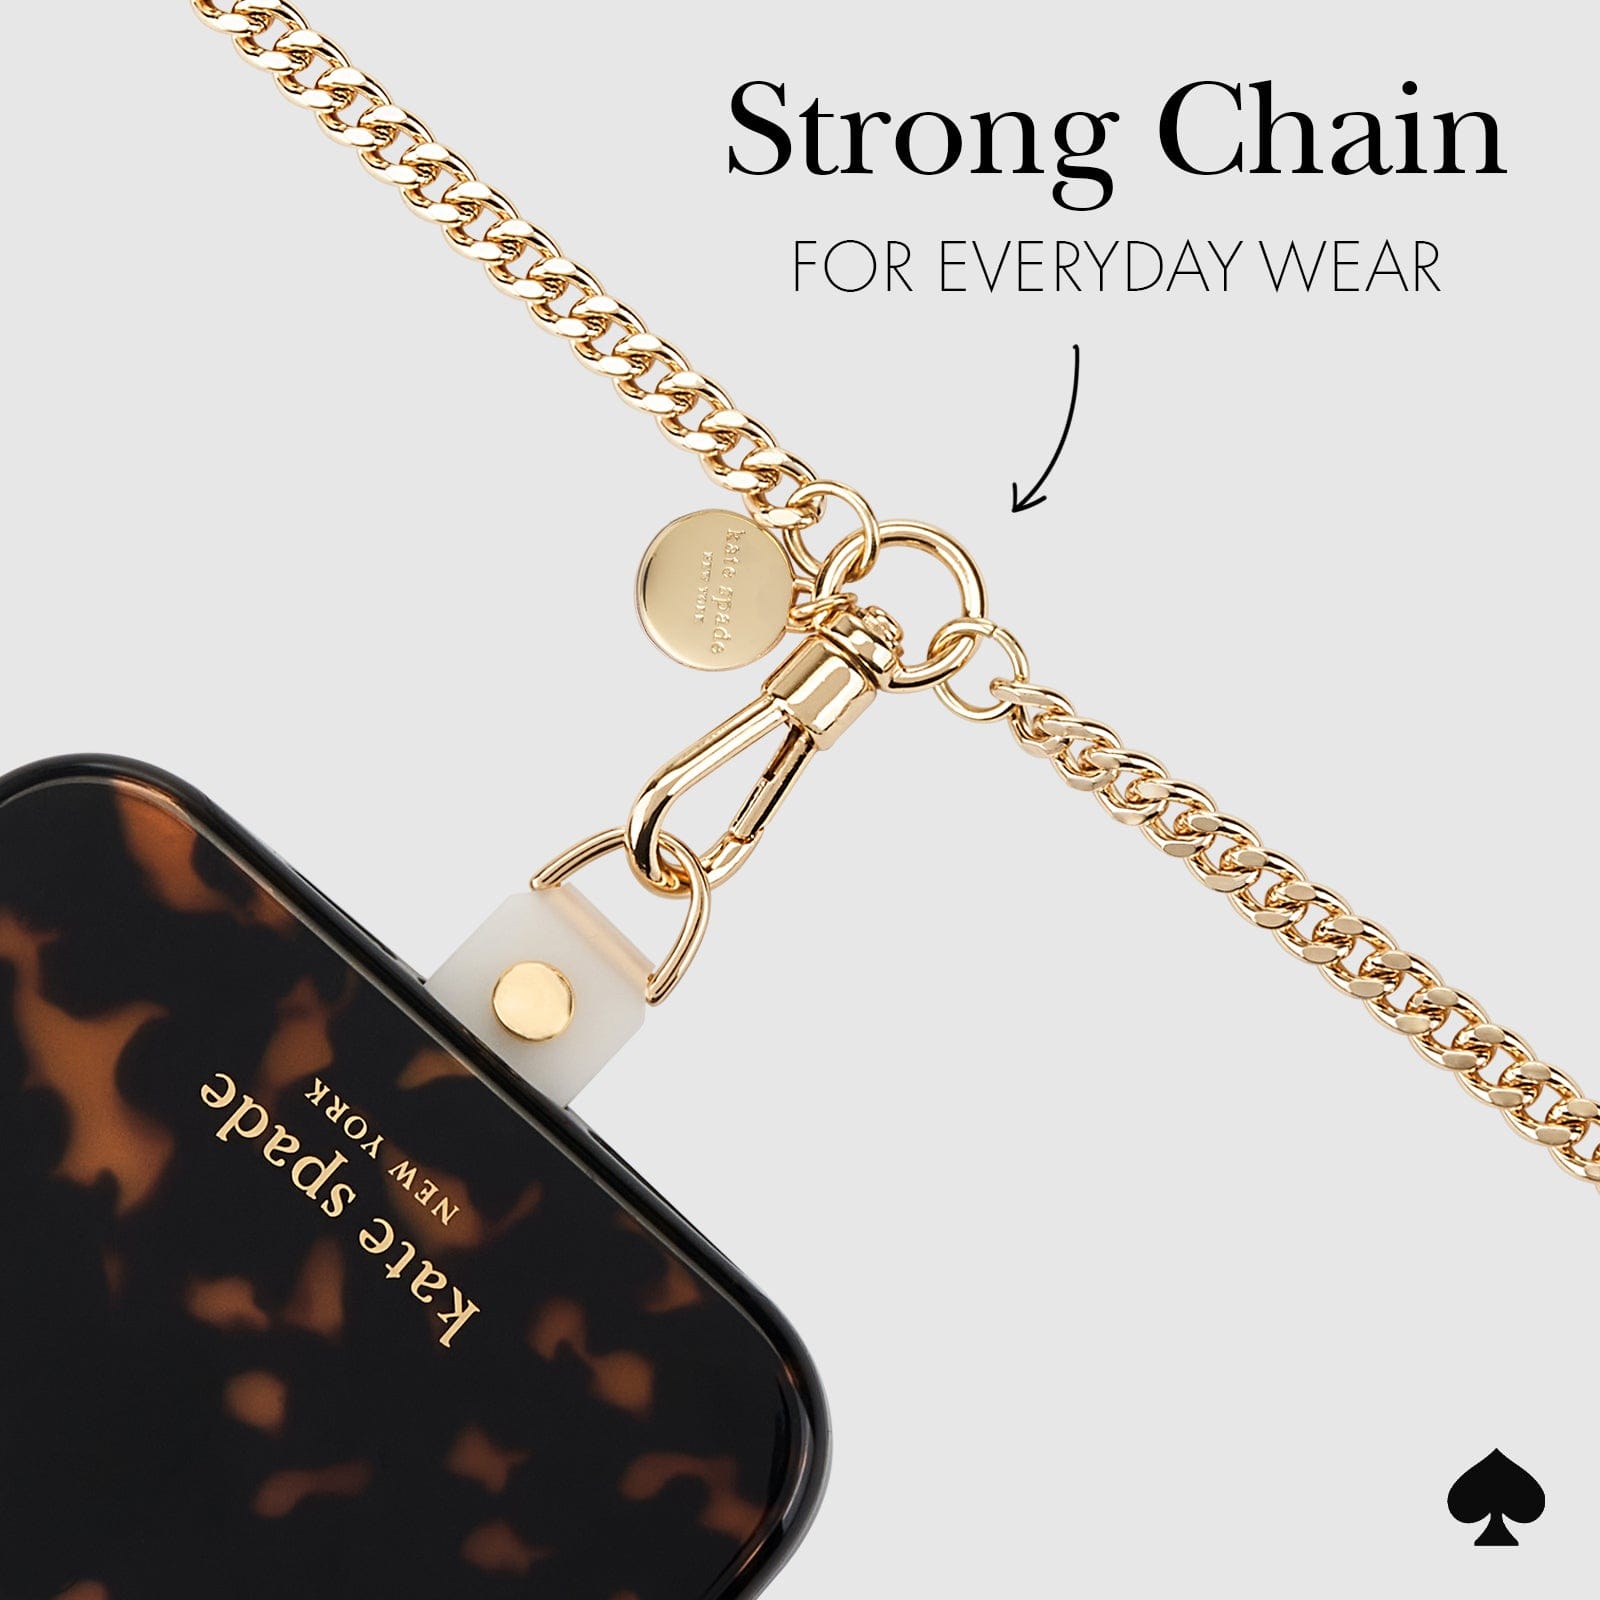 STRONG CHAIN FOR EVERYDAY WEAR